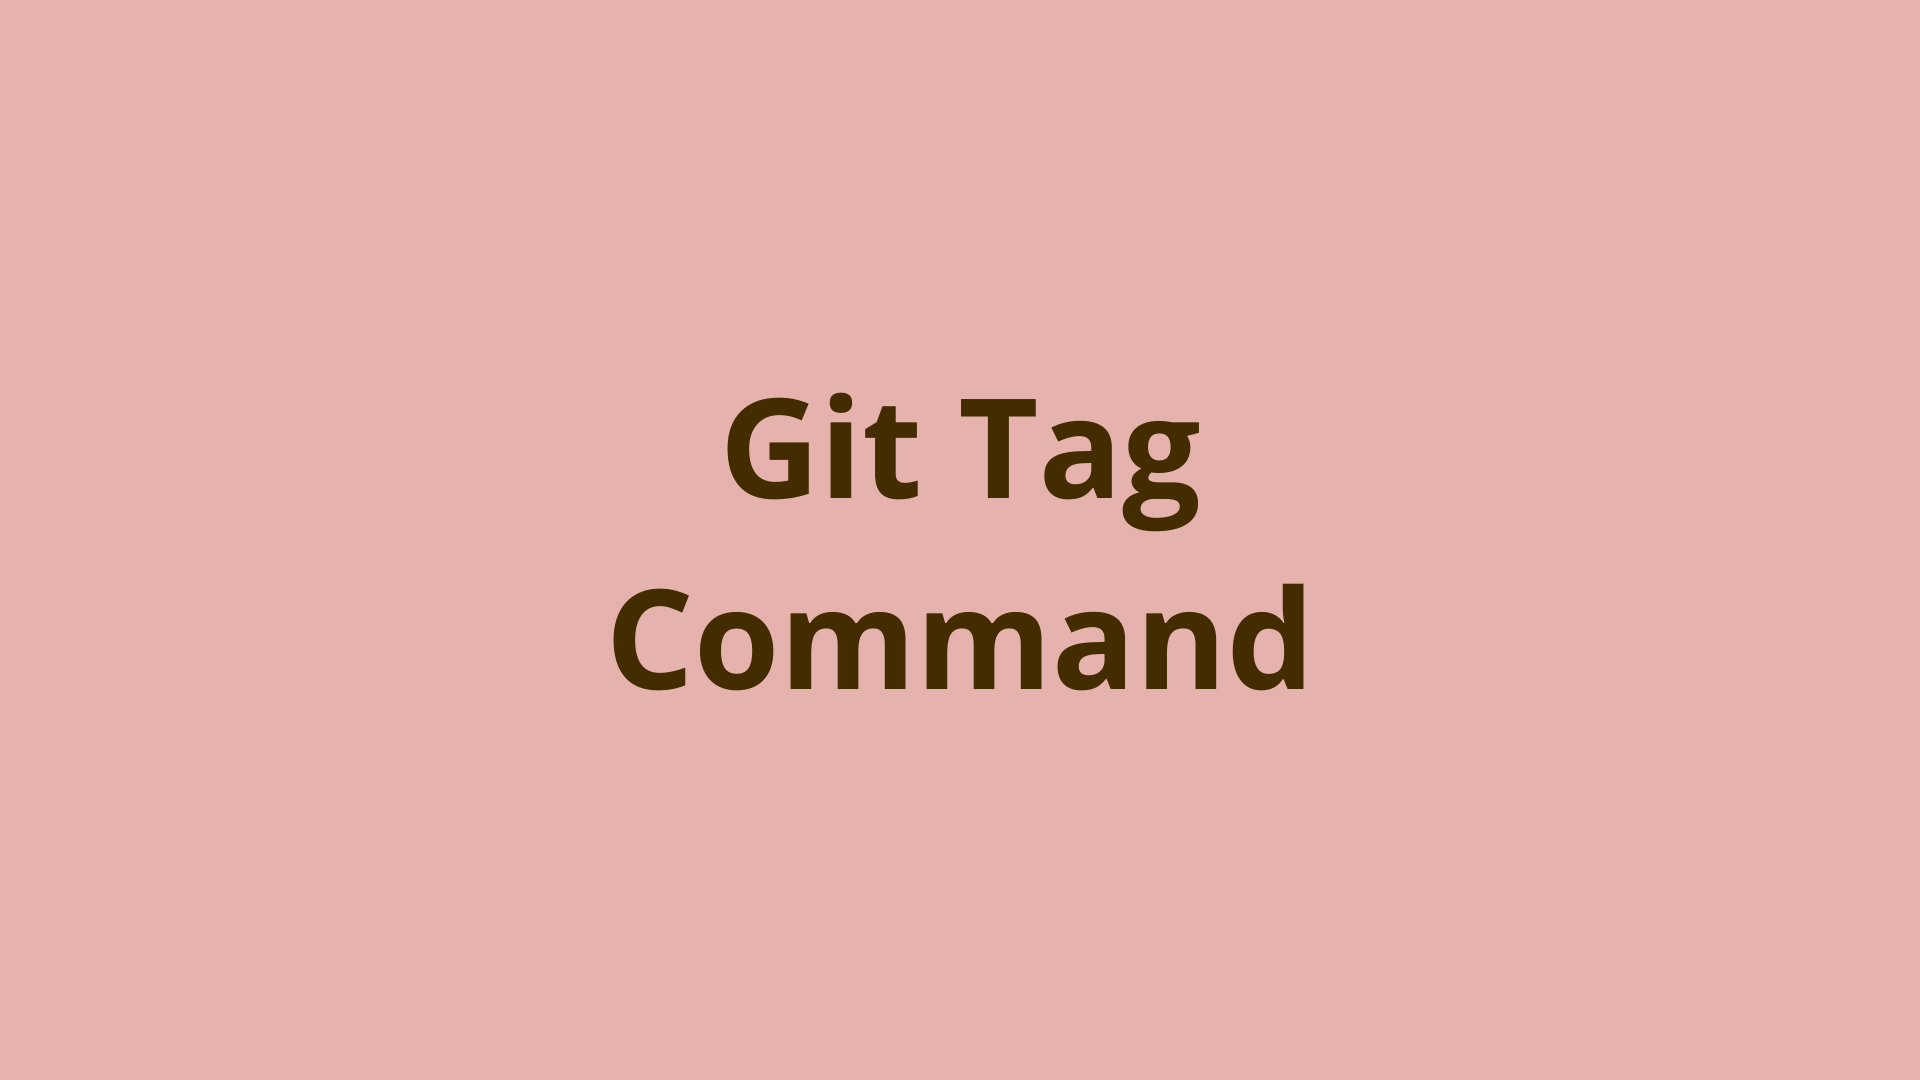 Image of Git Tag | Git Tagging Explained